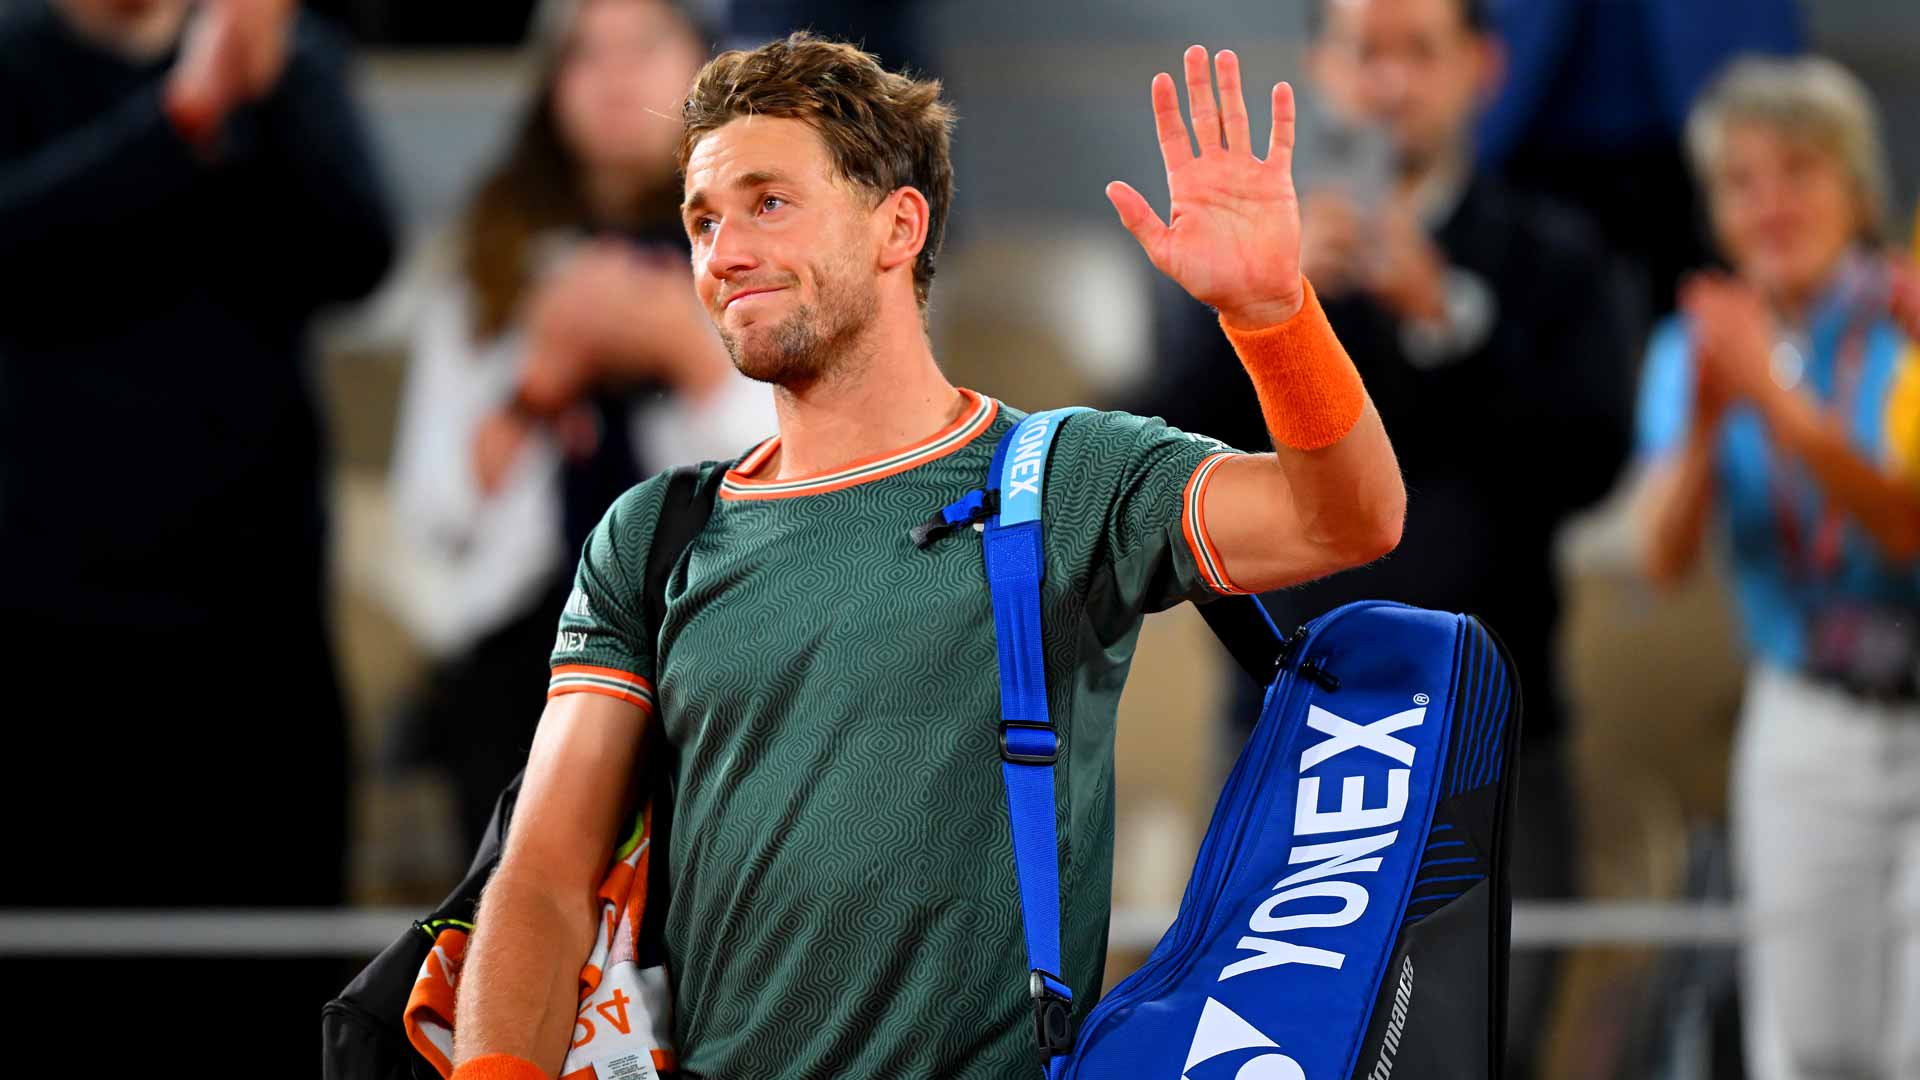 Casper Ruud waves to the Court Philippe-Chatrier crowd after losing in the Roland Garros semi-finals to Alexander Zverev.